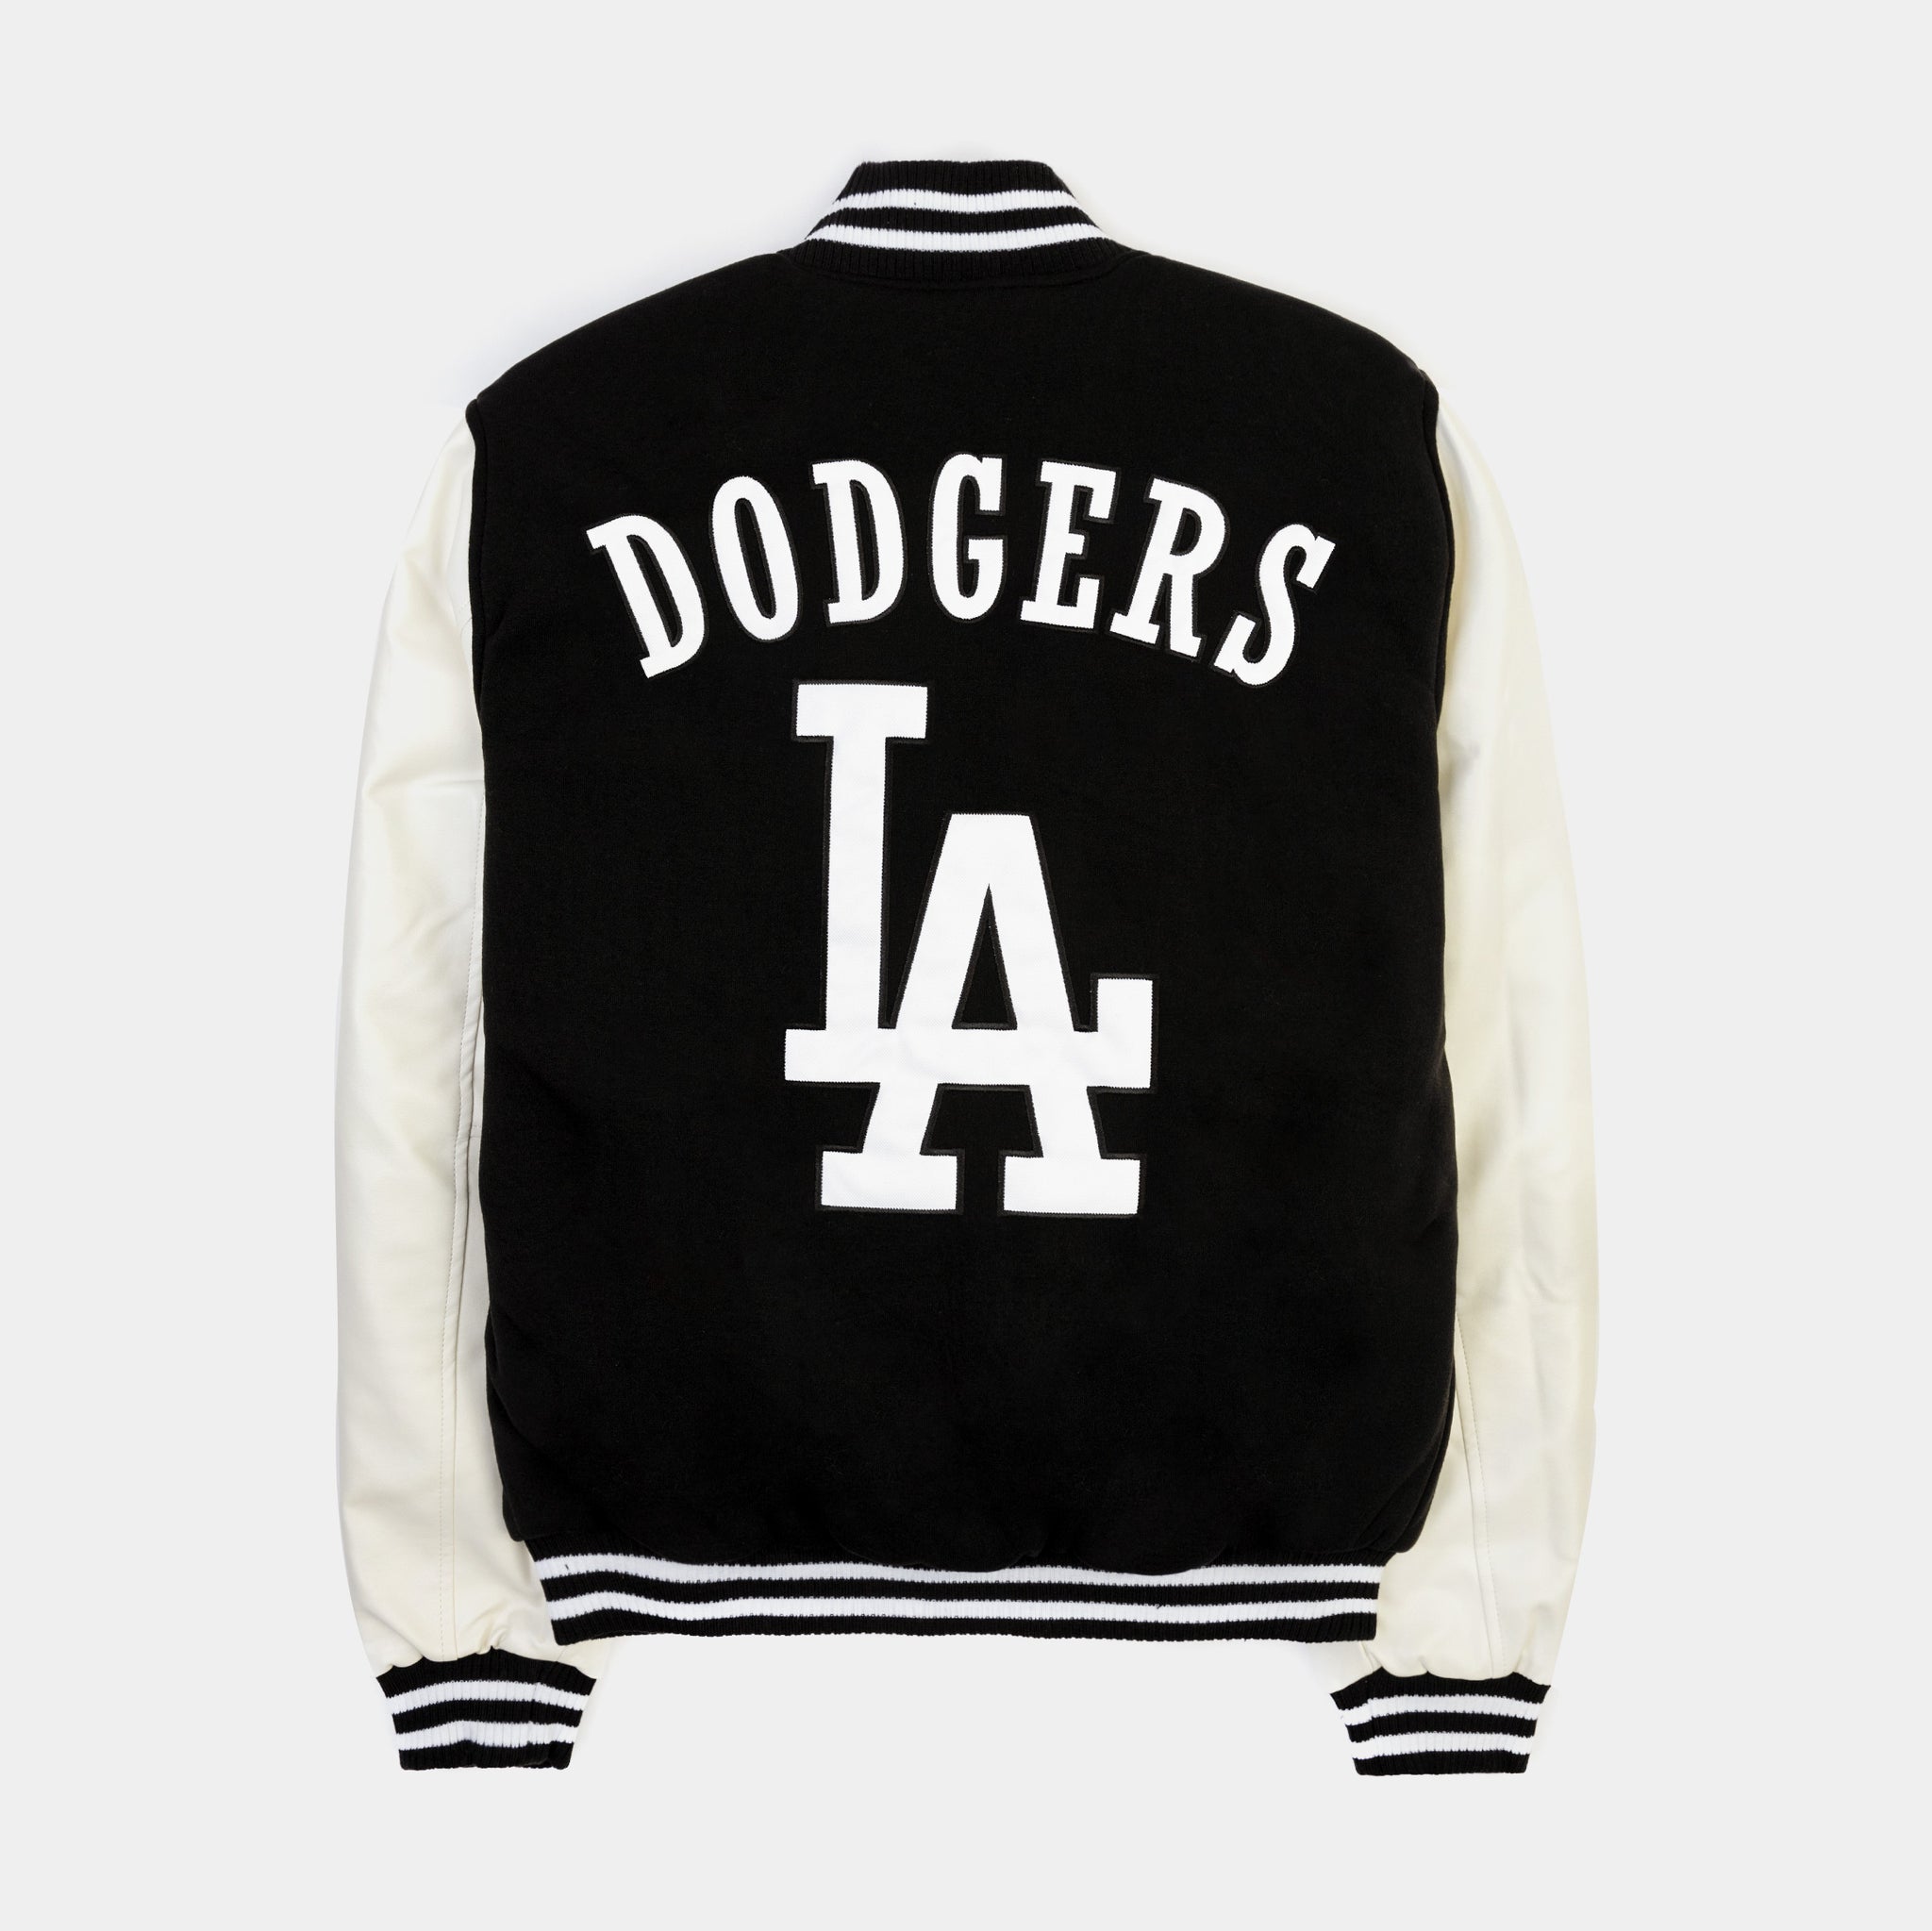 los angeles dodgers, los angeles dodgers Suppliers and Manufacturers at